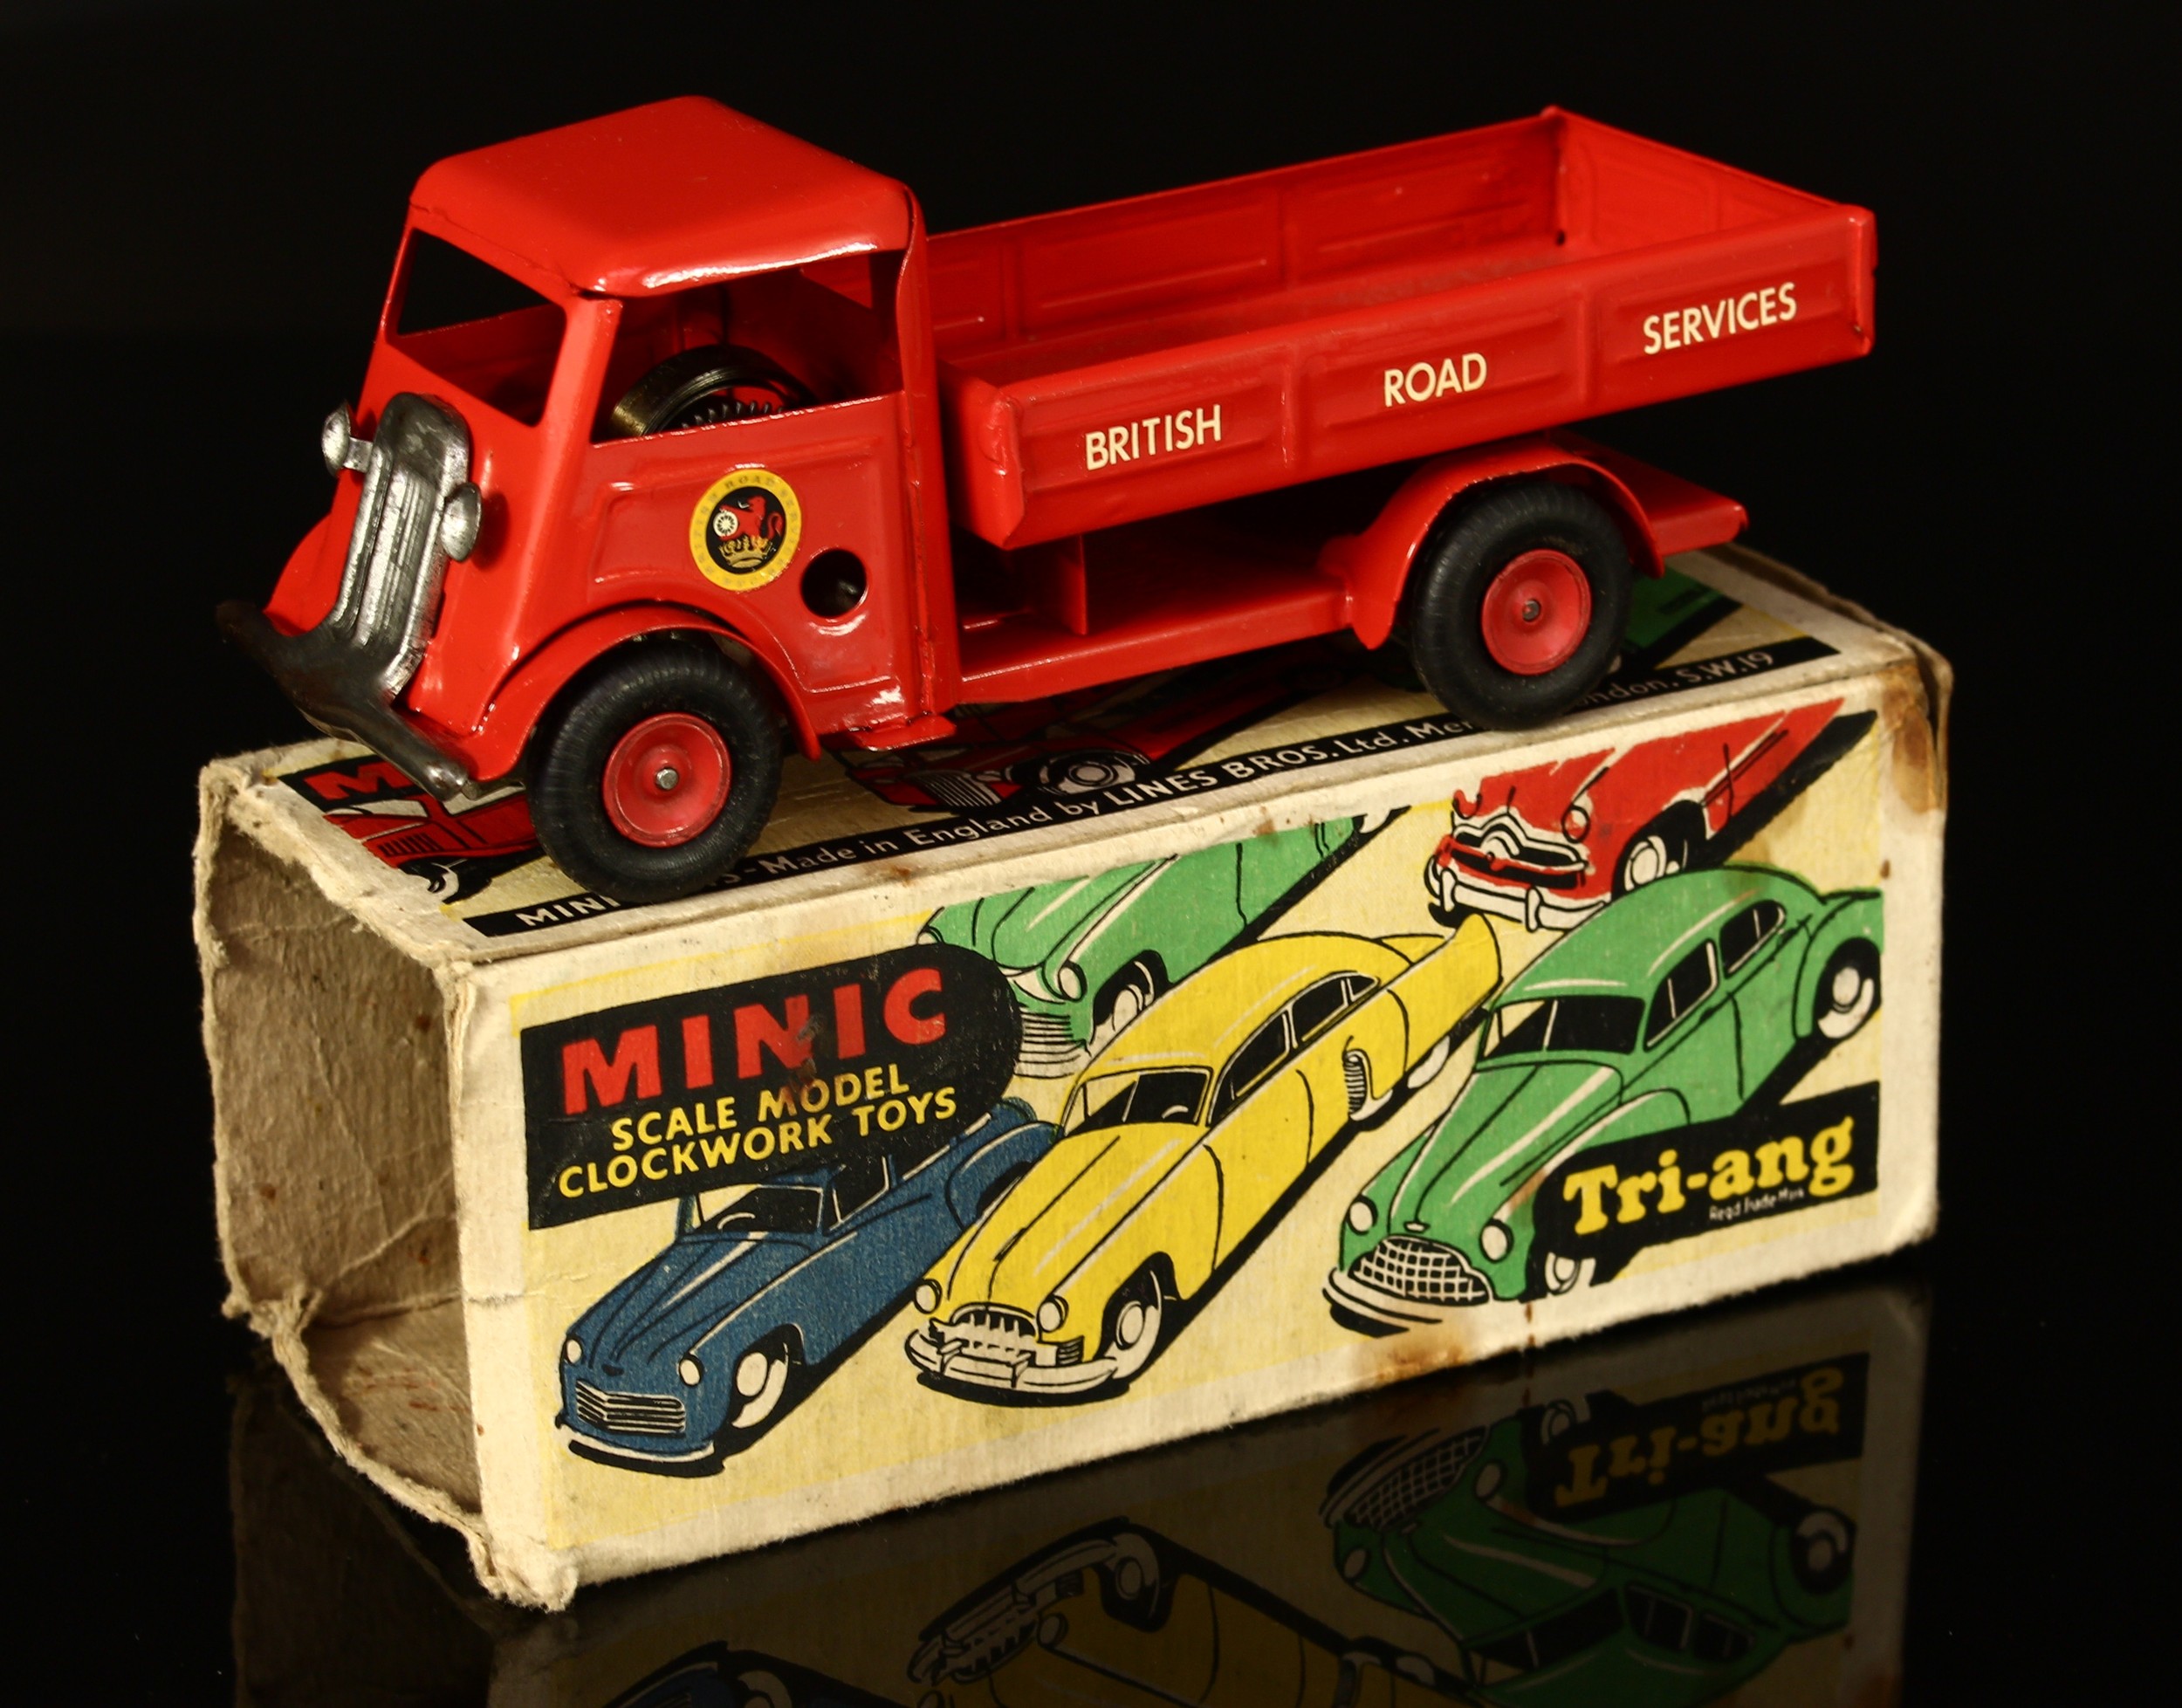 Tri-ang Minic (Lines Brothers) tinplate and clockwork British road services open lorry, red cab